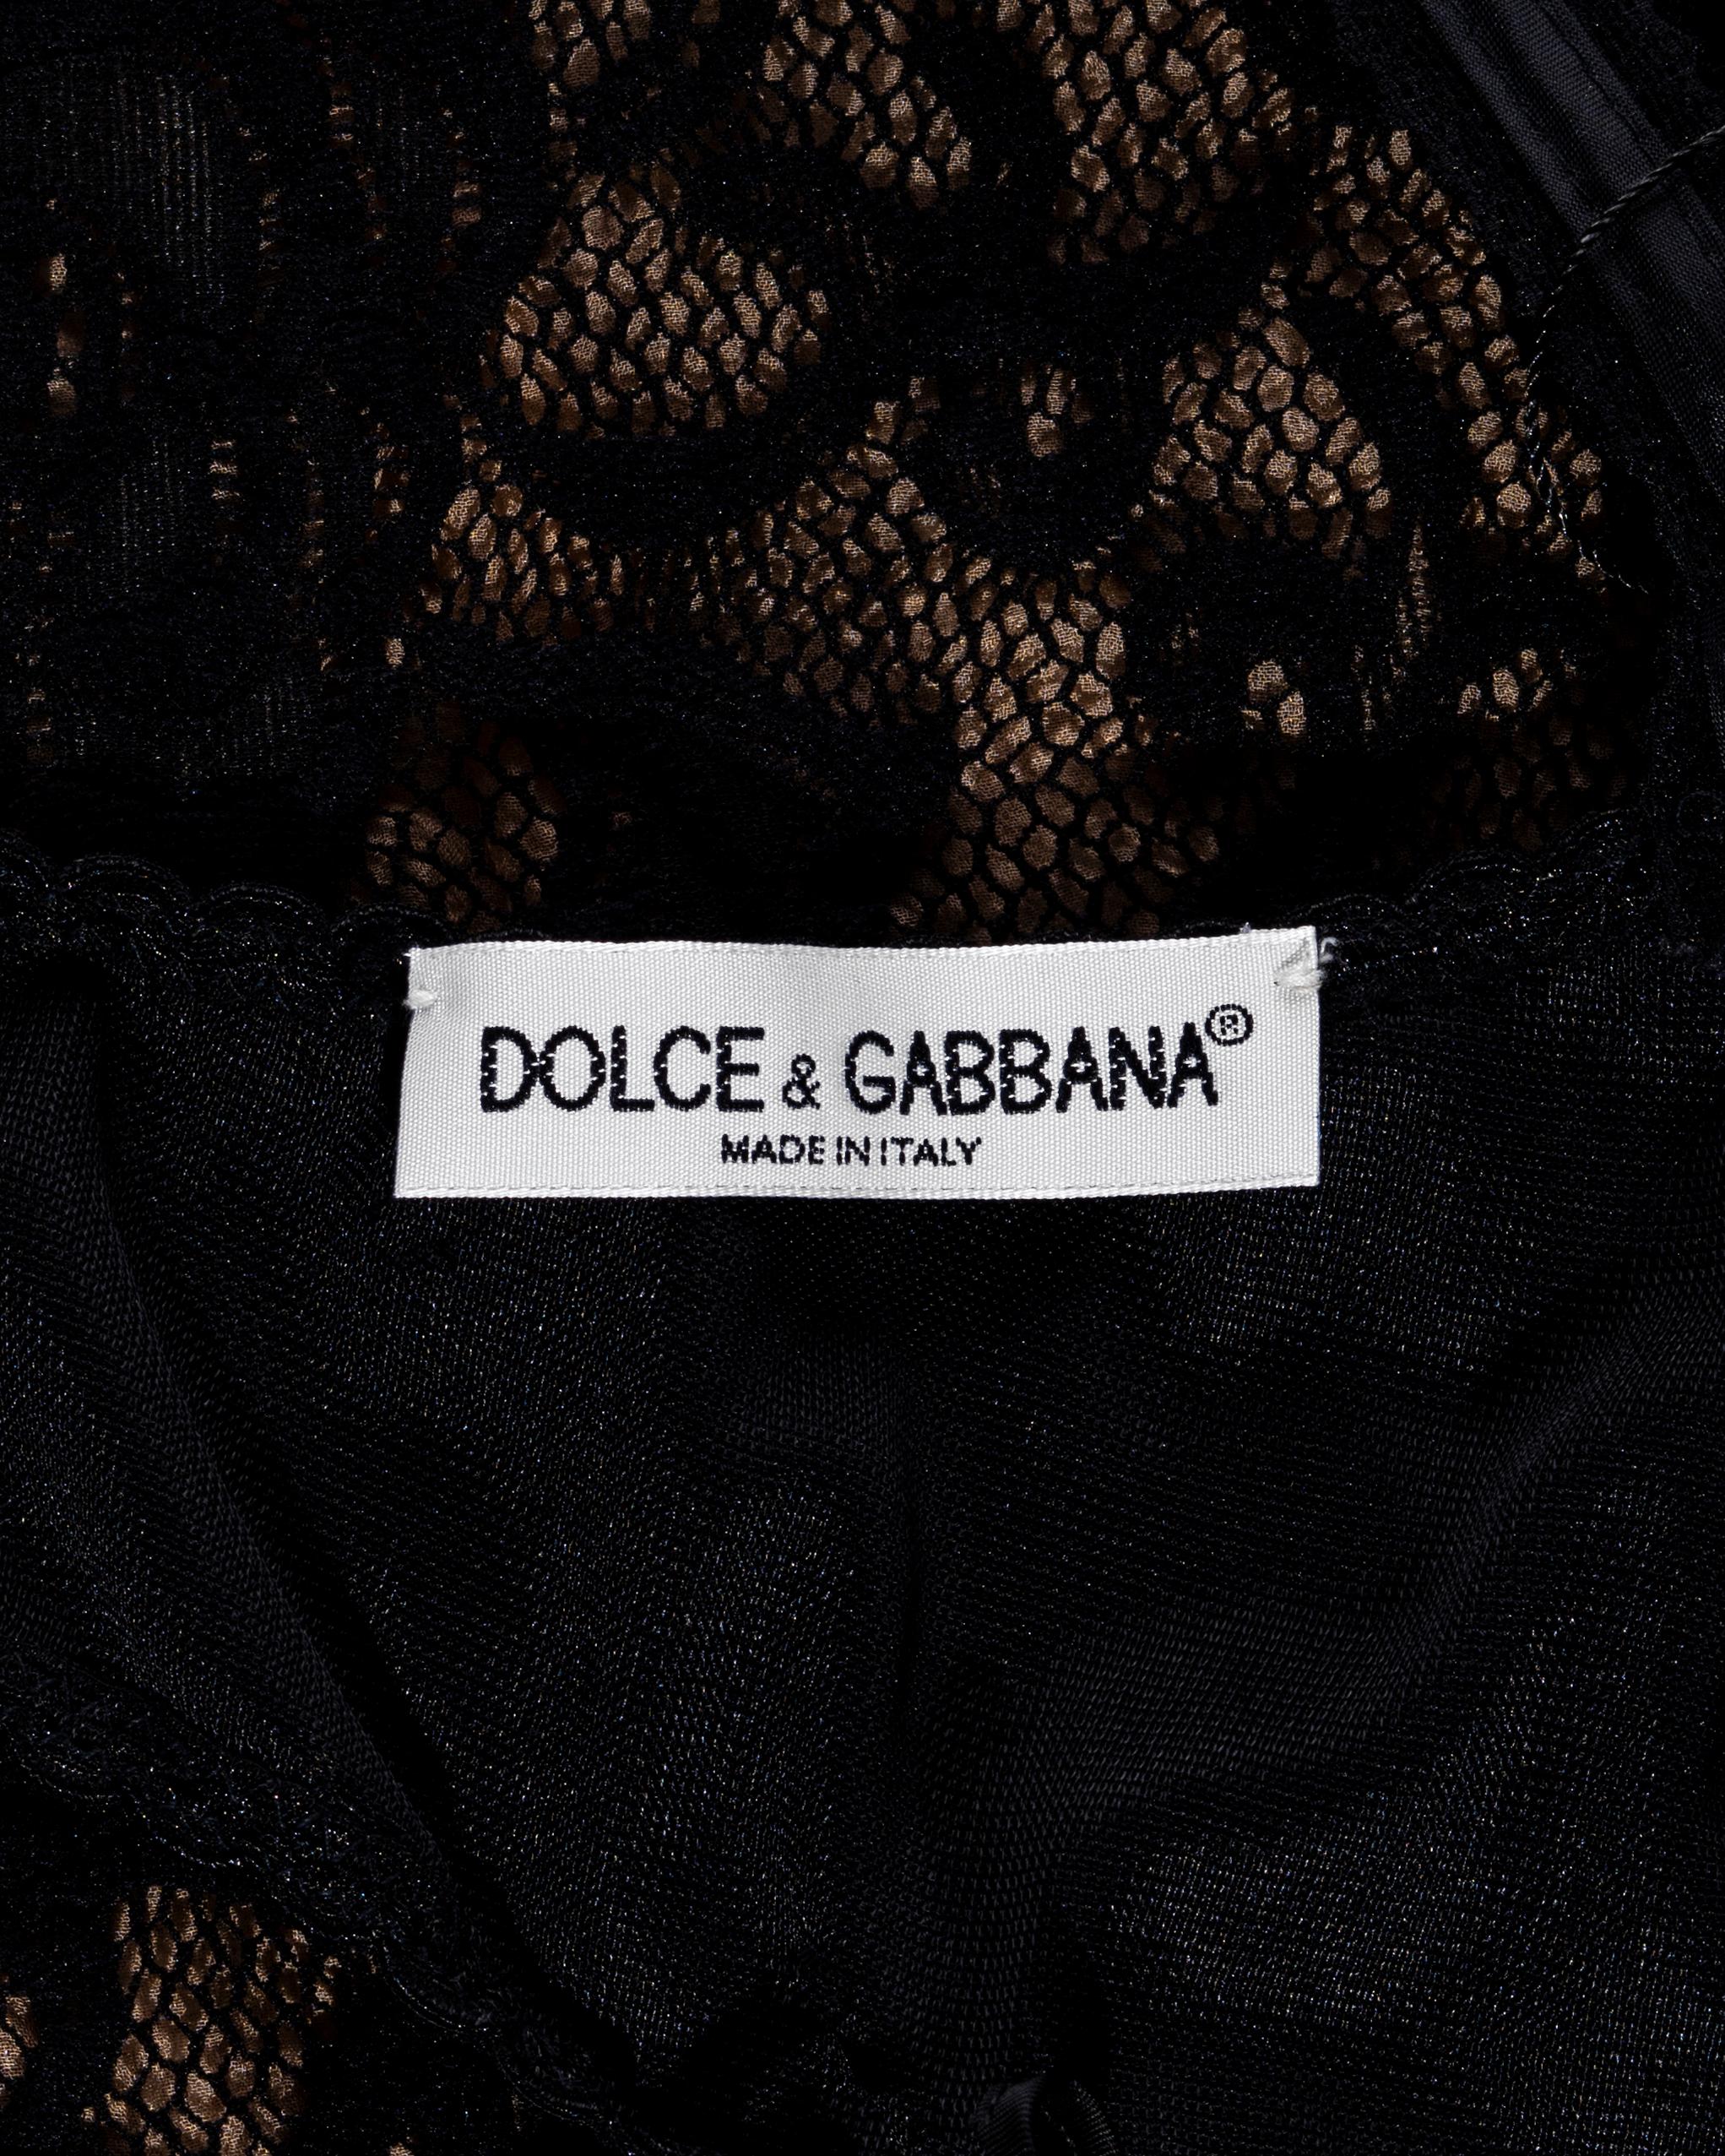 Dolce & Gabbana black lace evening dress with attached bra, ss 1997 For Sale 4